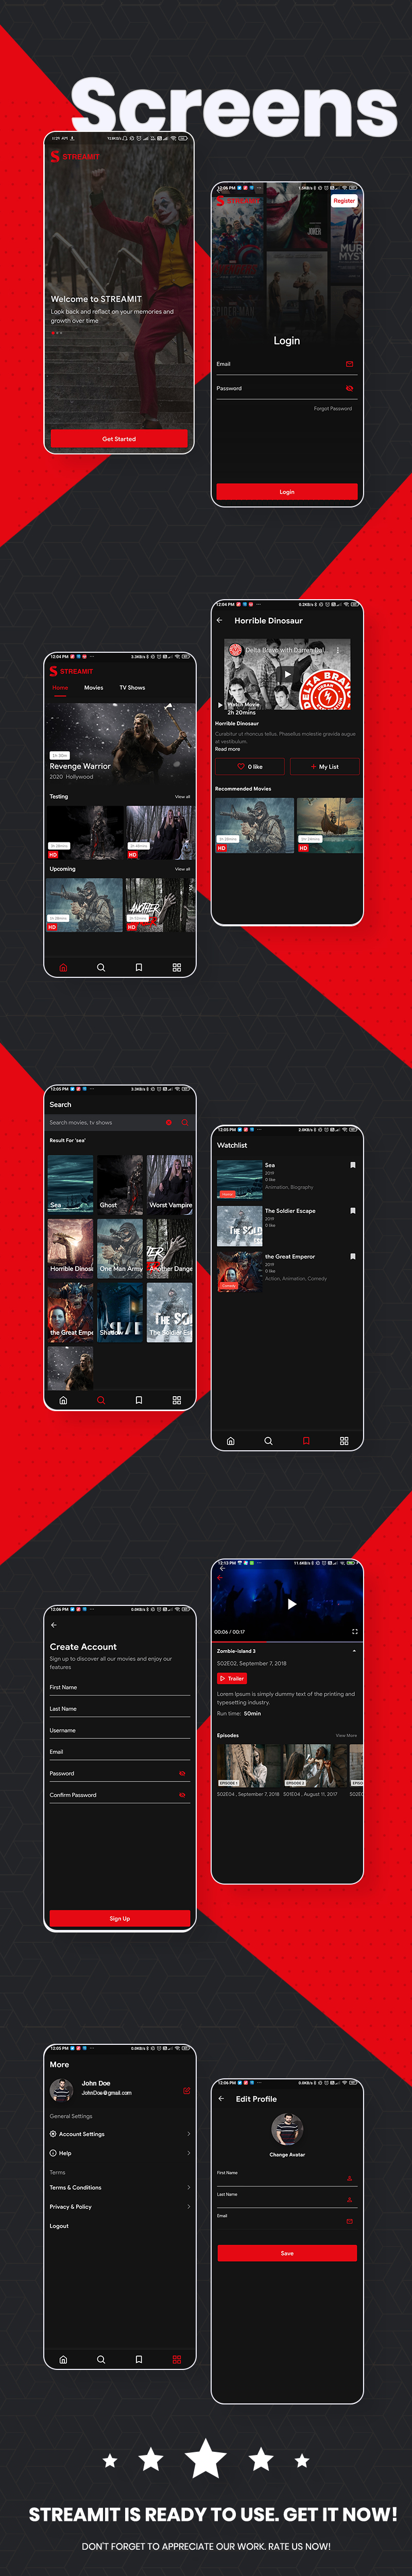 Streamit - Flutter Full App For Video Streaming With WordPress Backend - 9